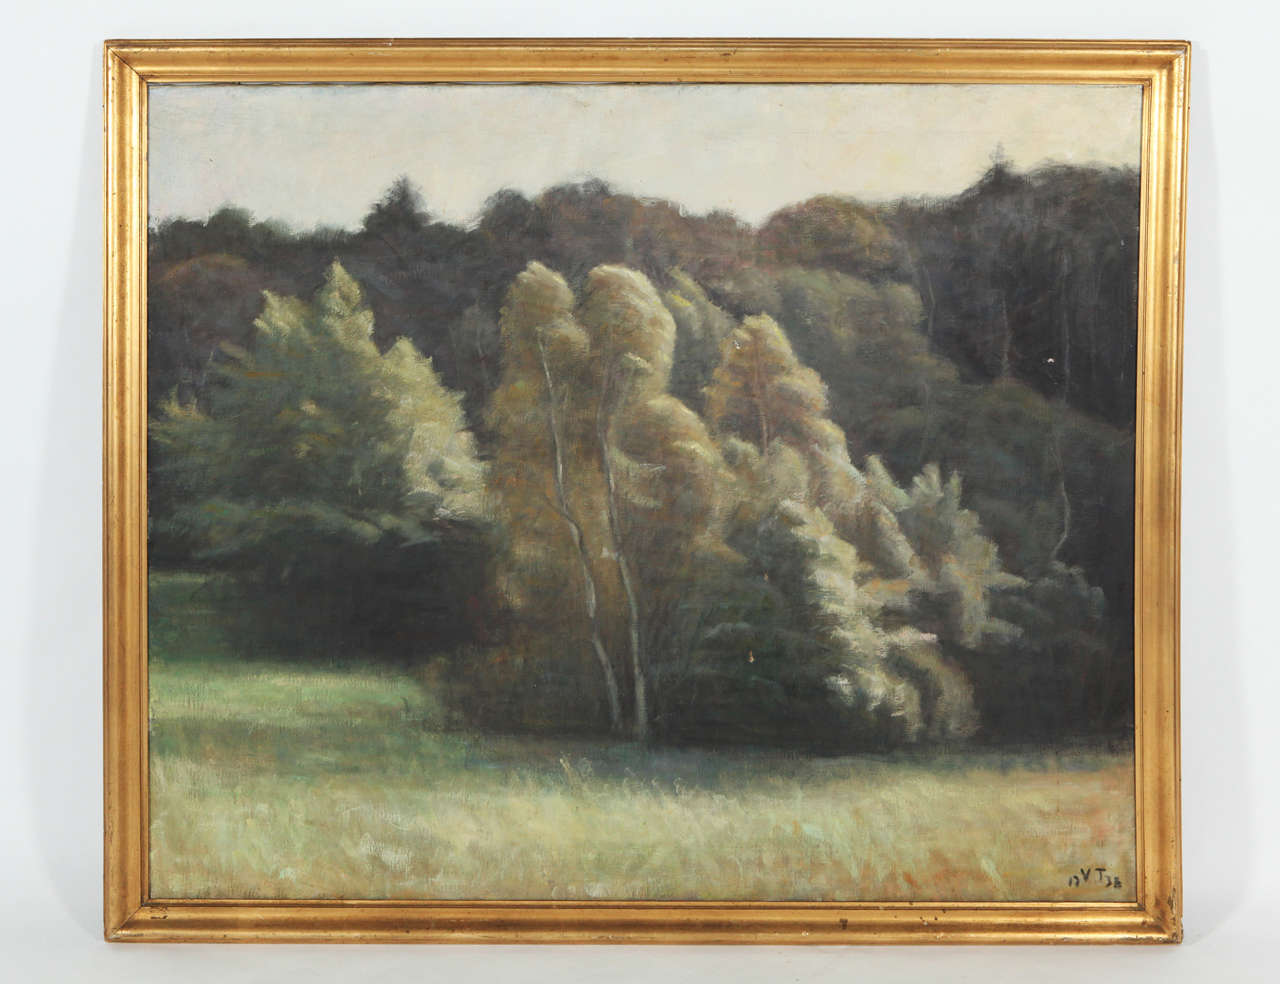 Landscape painting by Vilhelm Tetens, Denmark, 1938. 
Monogrammed and dated.
Oil on canvas.